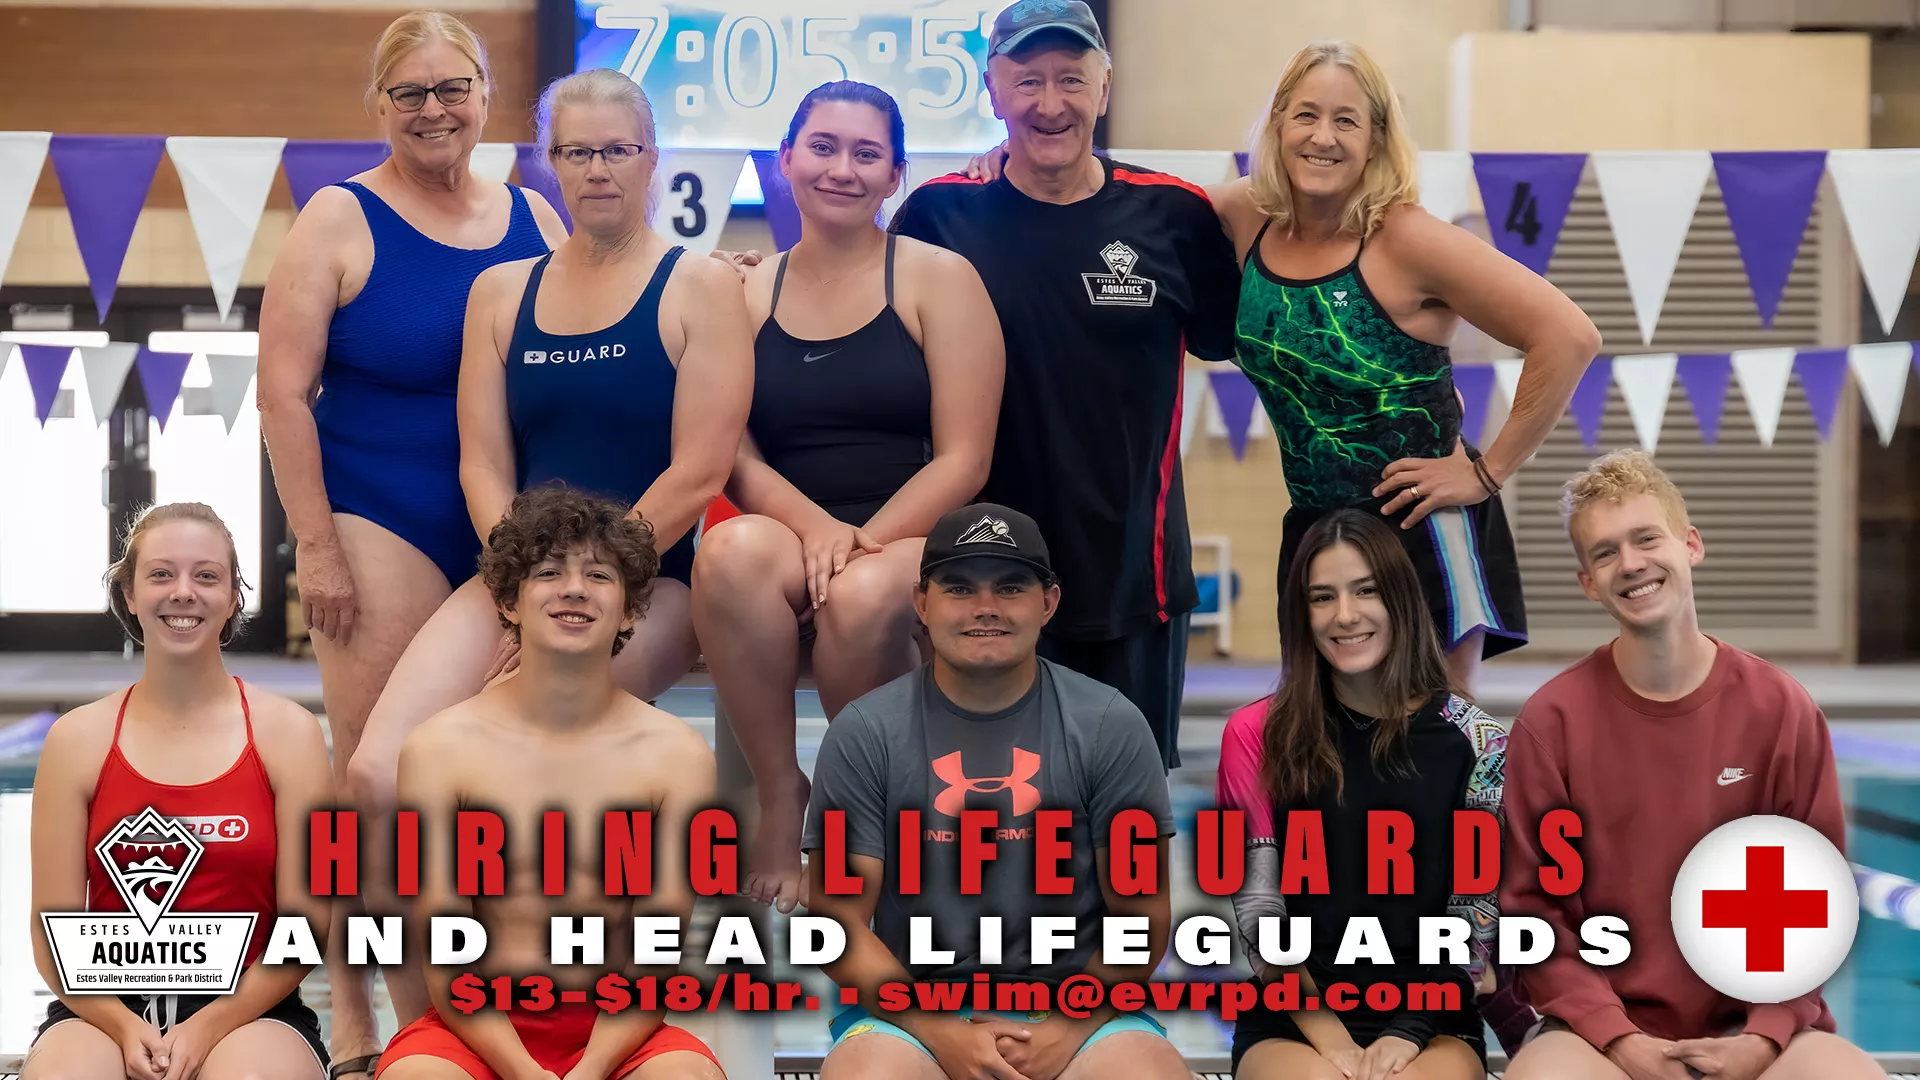 We are hiring lifeguards and head guards